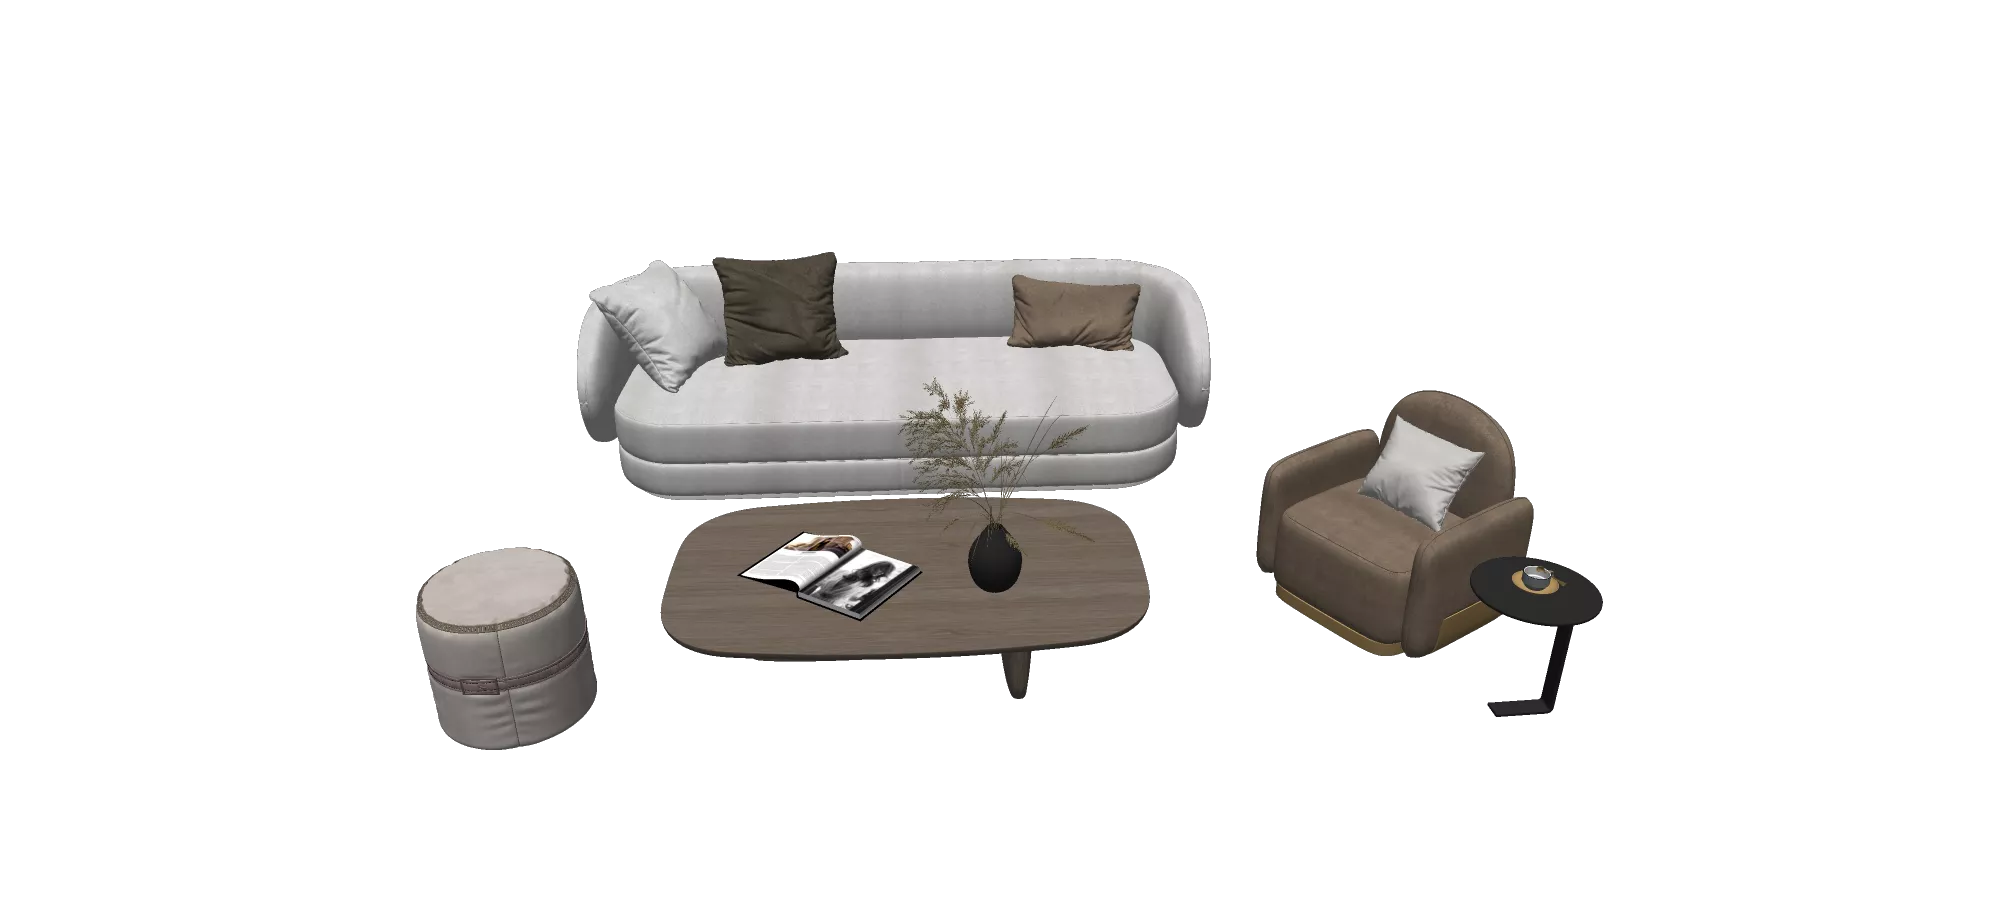 MODERN SOFA - SKETCHUP 3D MODEL - VRAY OR ENSCAPE - ID13053